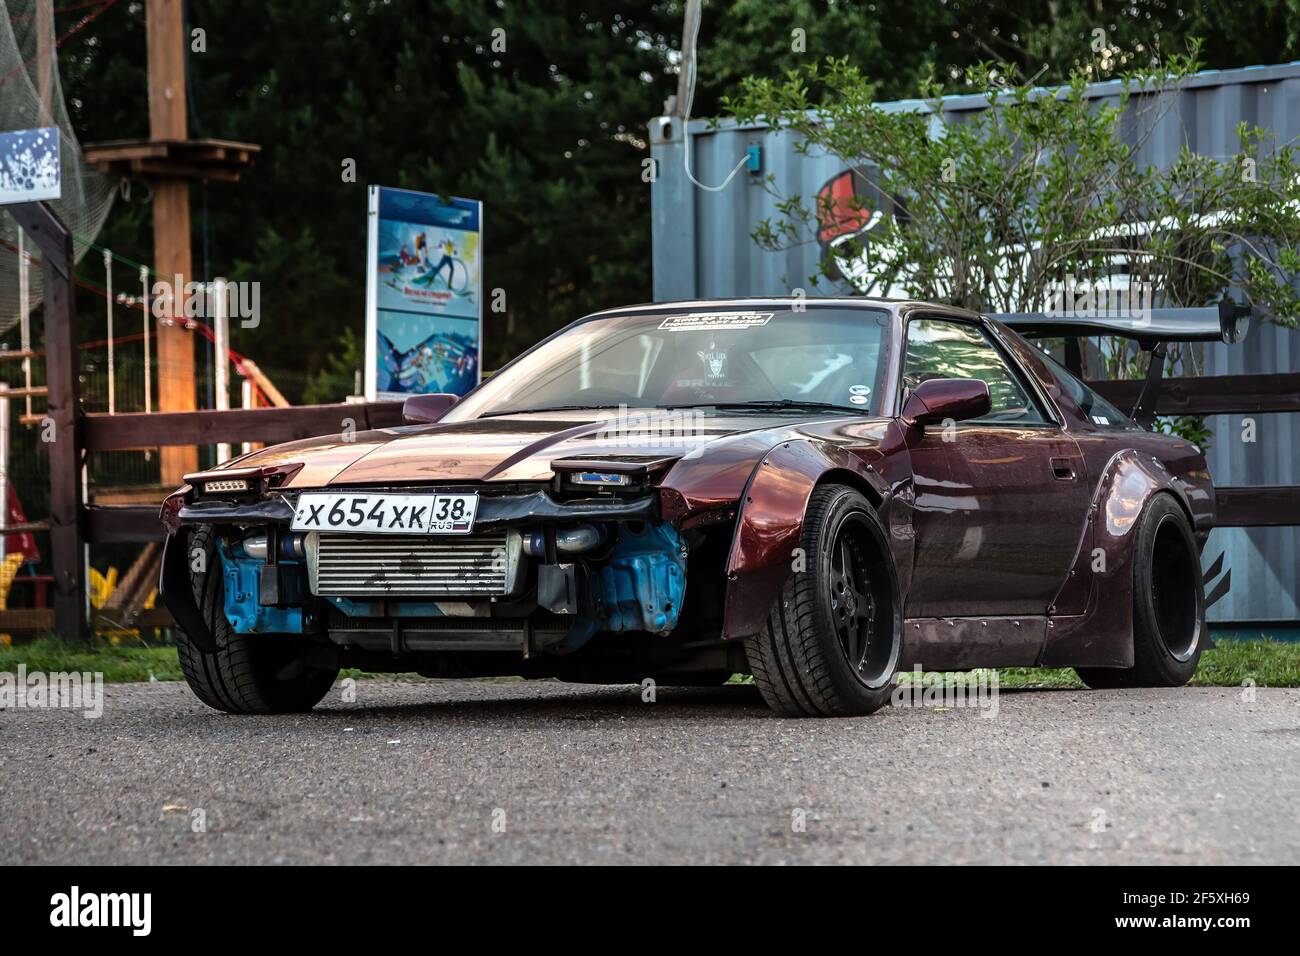 Moscow, Russia - July 06, 2019: Tuned Nissan 240SX. Special maded professional drift car. Parked near autodrome. Removed front bumper for trainings. Stock Photo